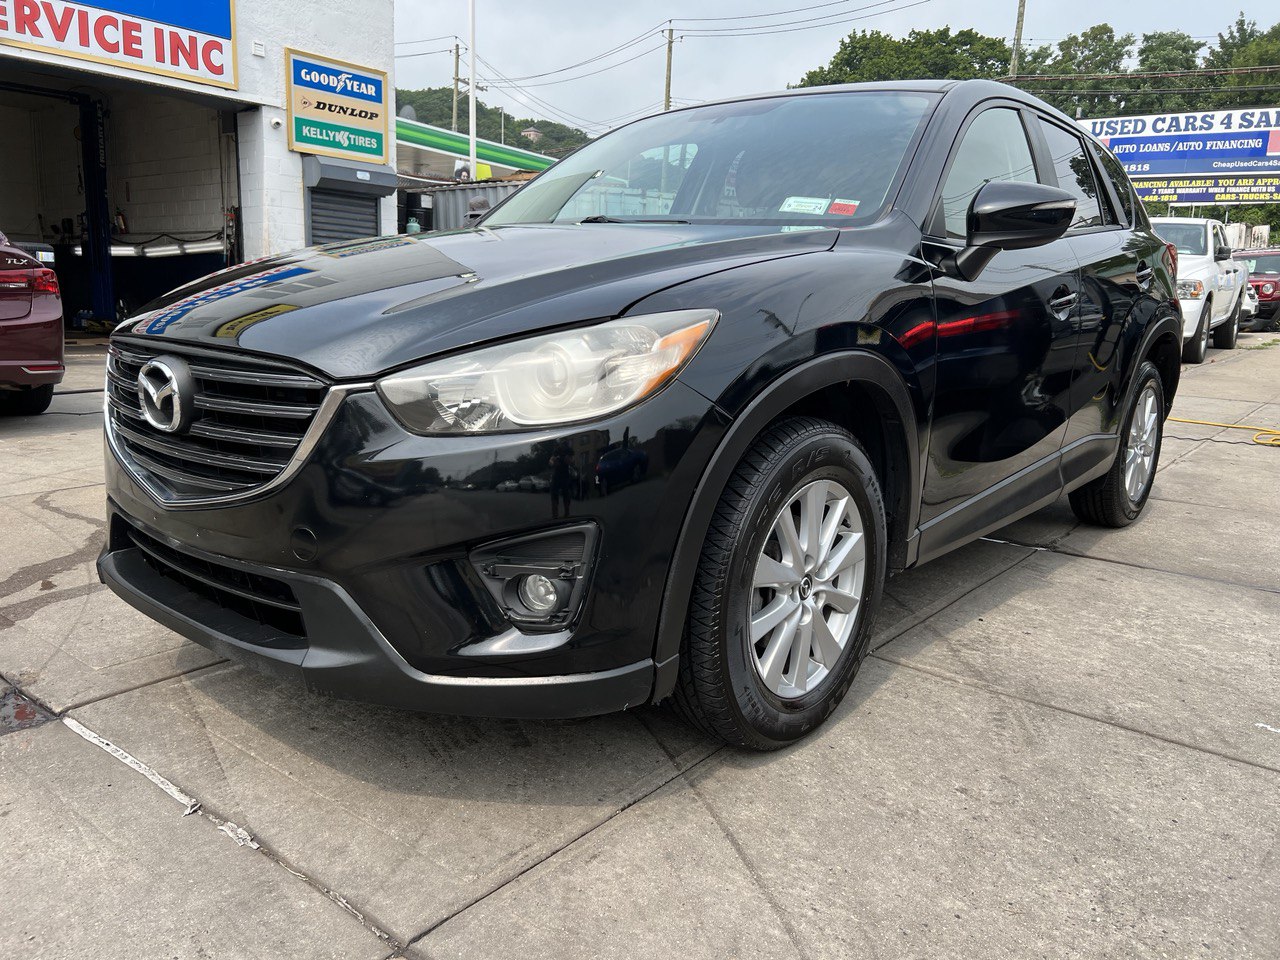 Used Car - 2016 Mazda CX-5 Touring for Sale in Staten Island, NY